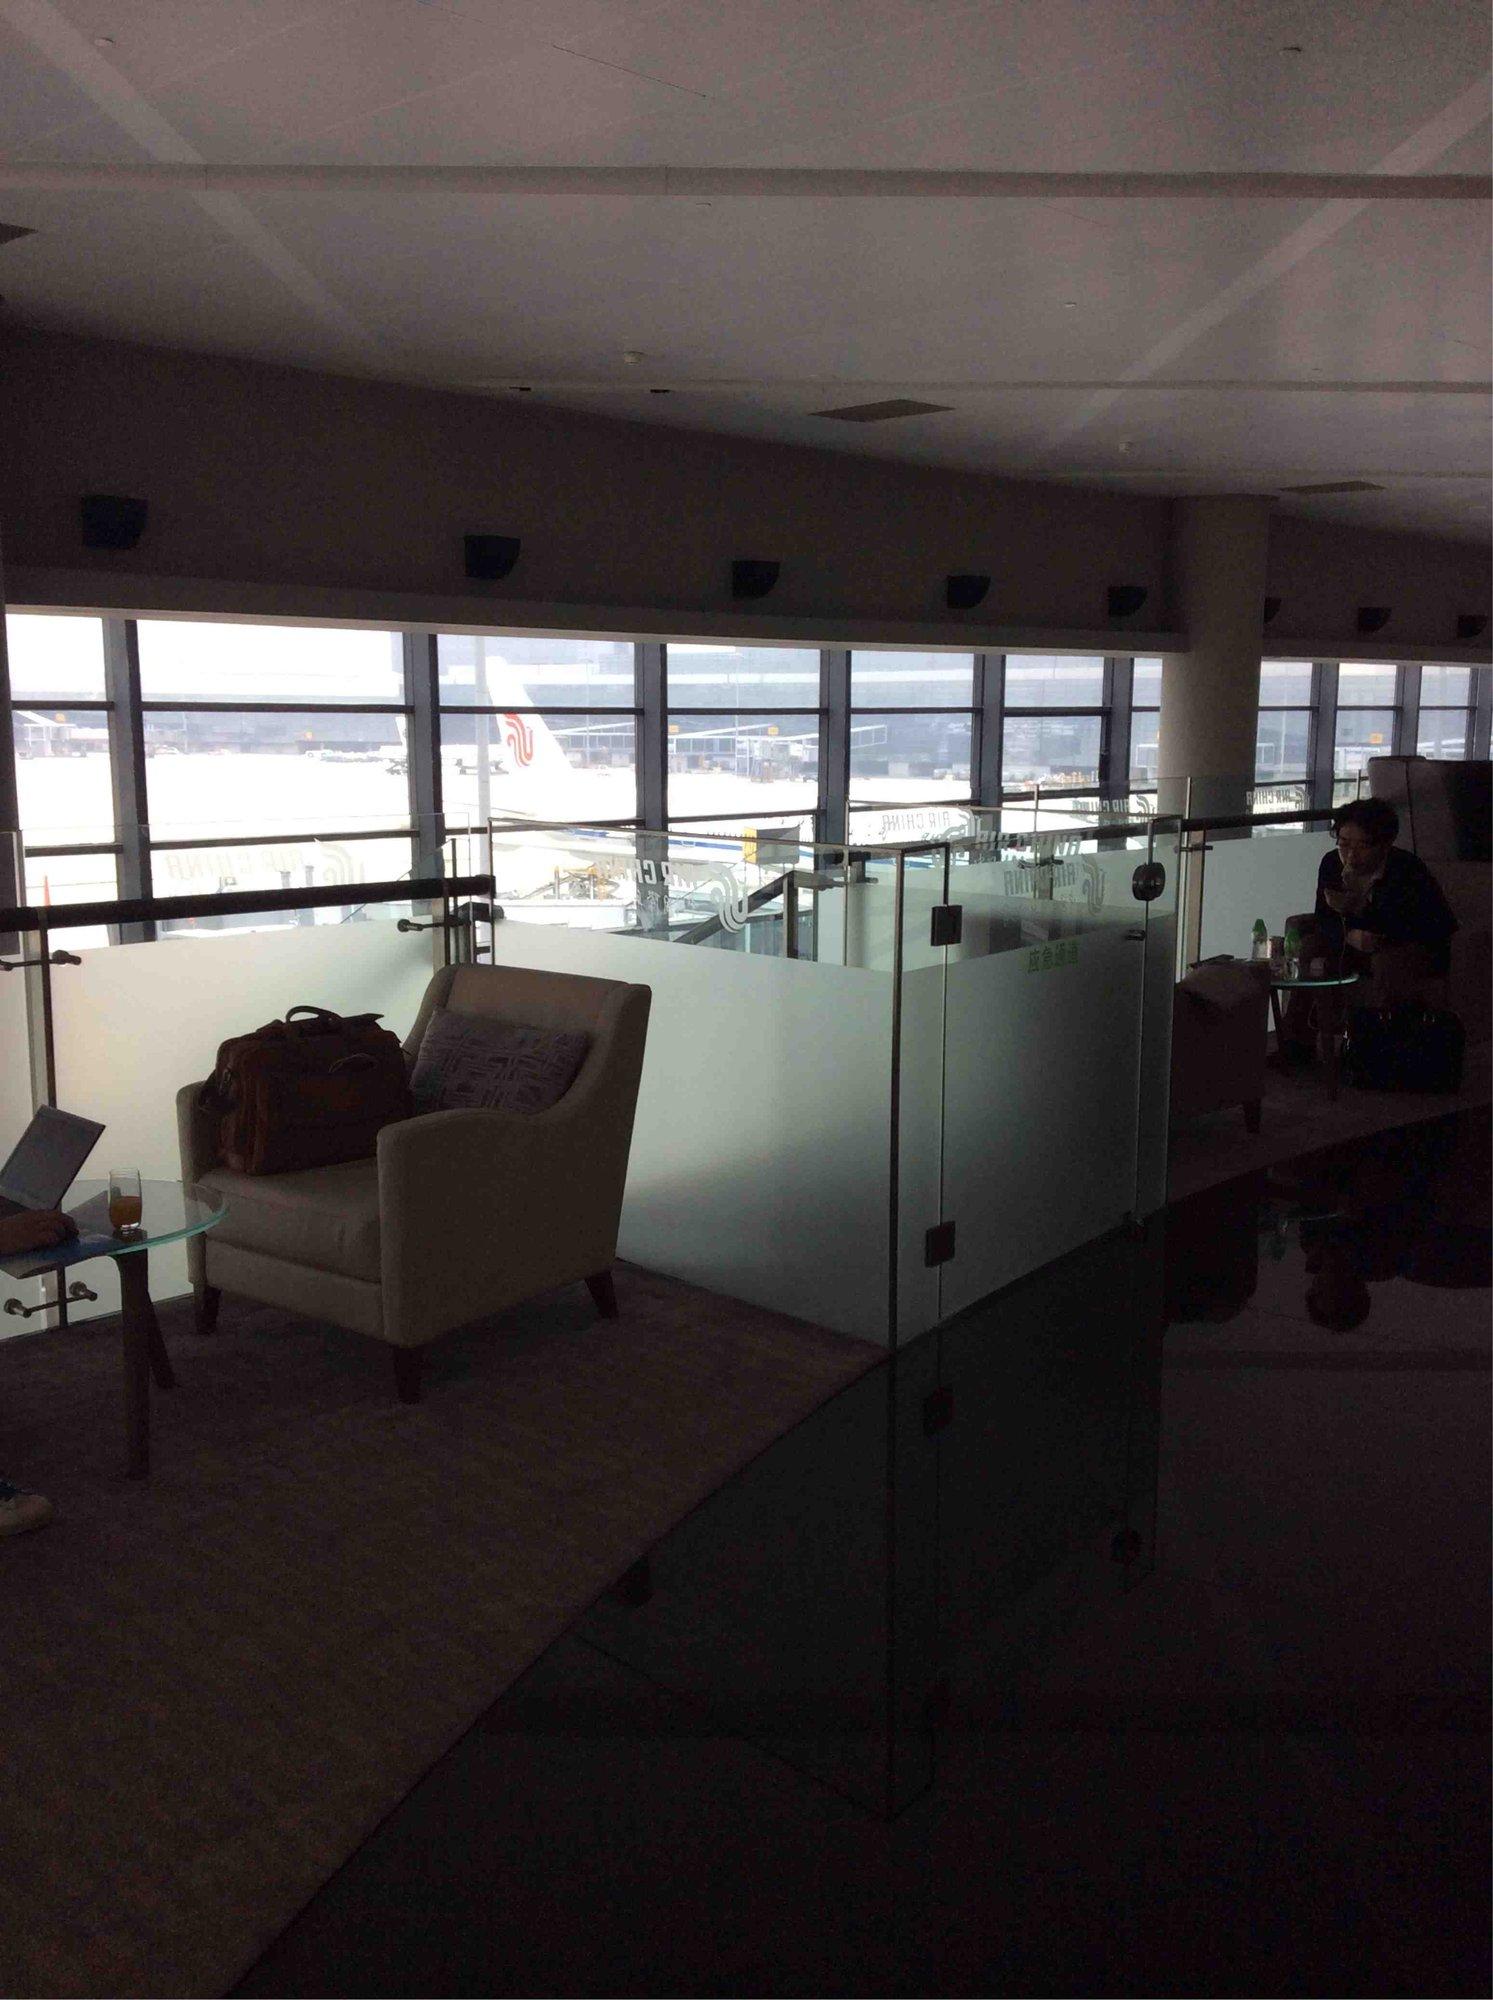 V8 Air China First & Business Class Lounge image 3 of 9